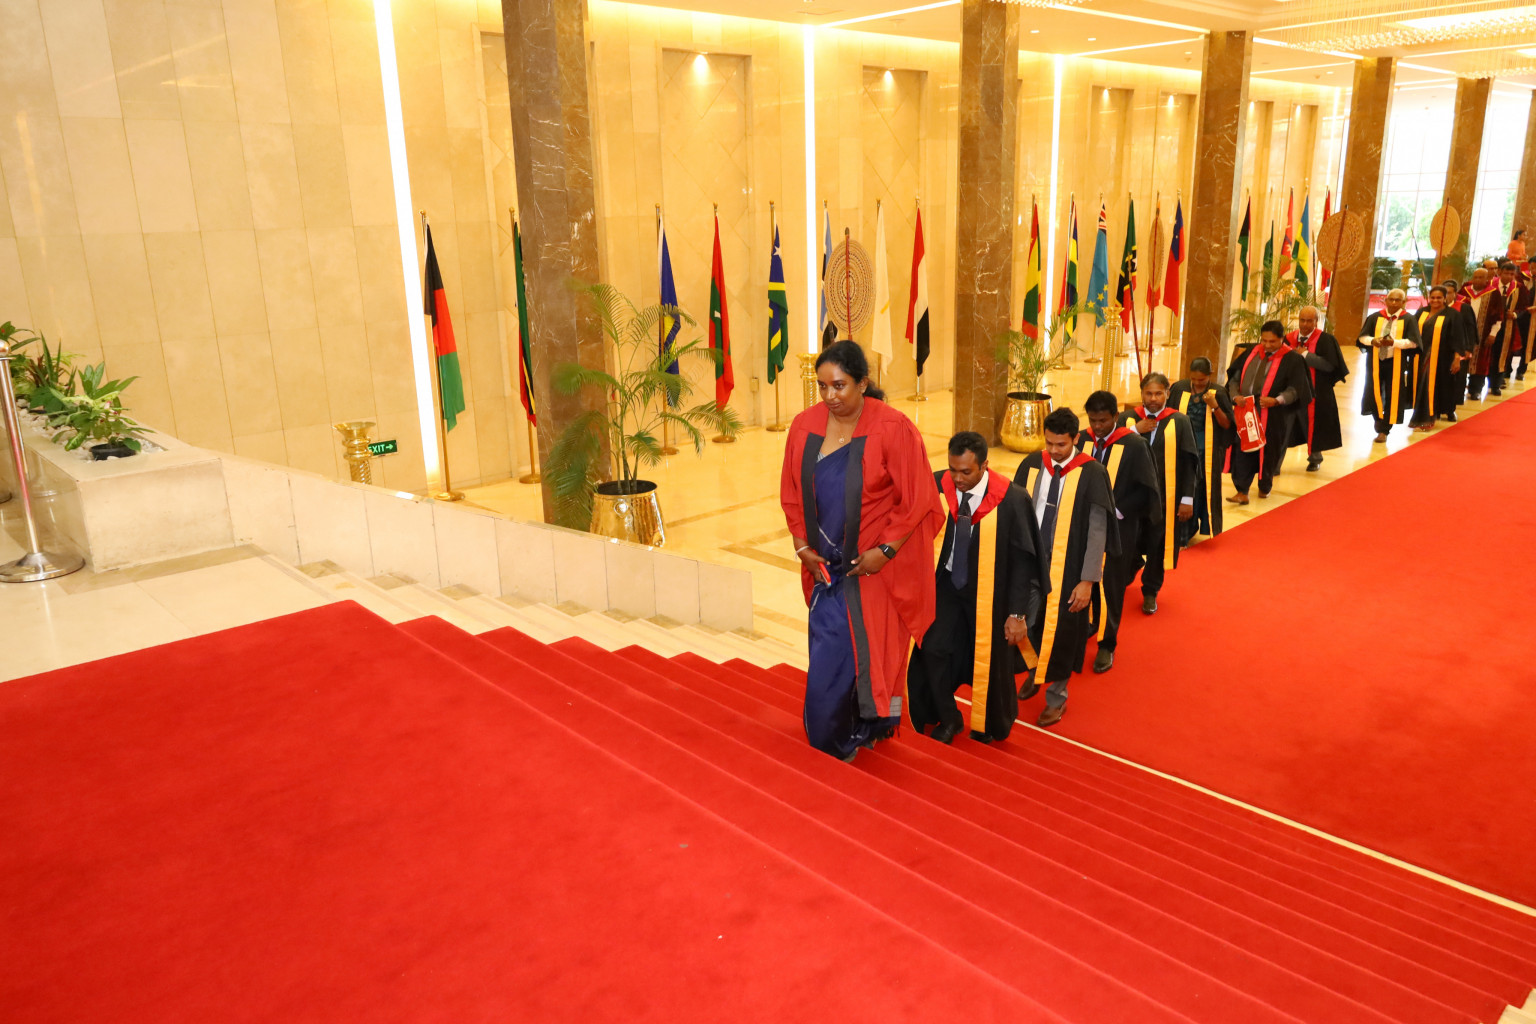 44TH GENERAL CONVOCATION OF THE UNIVERSITY OF MORATUWA